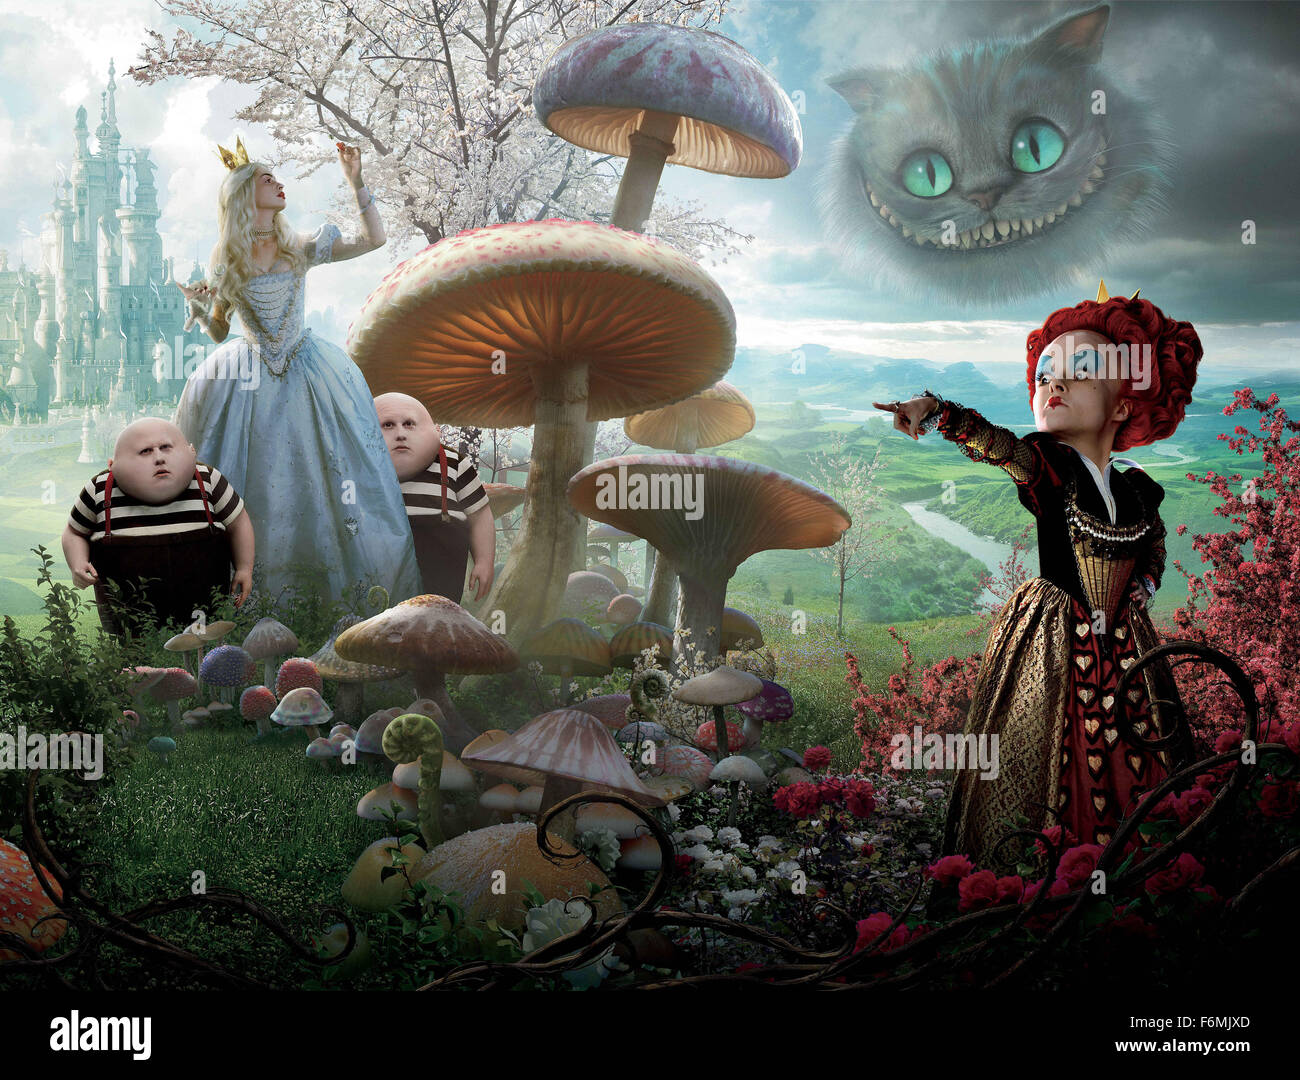 RELEASE DATE: March 5, 2010   MOVIE TITLE: Alice in Wonderland   STUDIO: Walt Disney Pictures   DIRECTOR: Tim Burton   PLOT: 19-year-old Alice returns to the magical world from her childhood adventure, where she reunites with her old friends and learns of her true destiny: to end the Red Queen's reign of terror   PICTURED: HELENA BONHAM CARTER as Red Queen, STEPHEN FRY as Cheshire Cat and ANNE HATHAWAY as White Queen   (Credit Image: c Walt Disney Pictures/Entertainment Pictures) Stock Photo